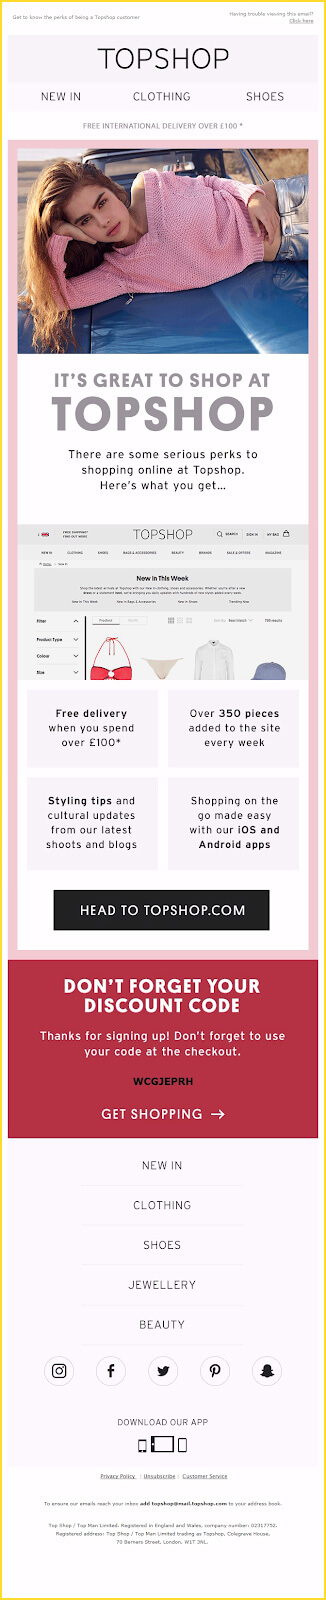 TopShop welcome email 2